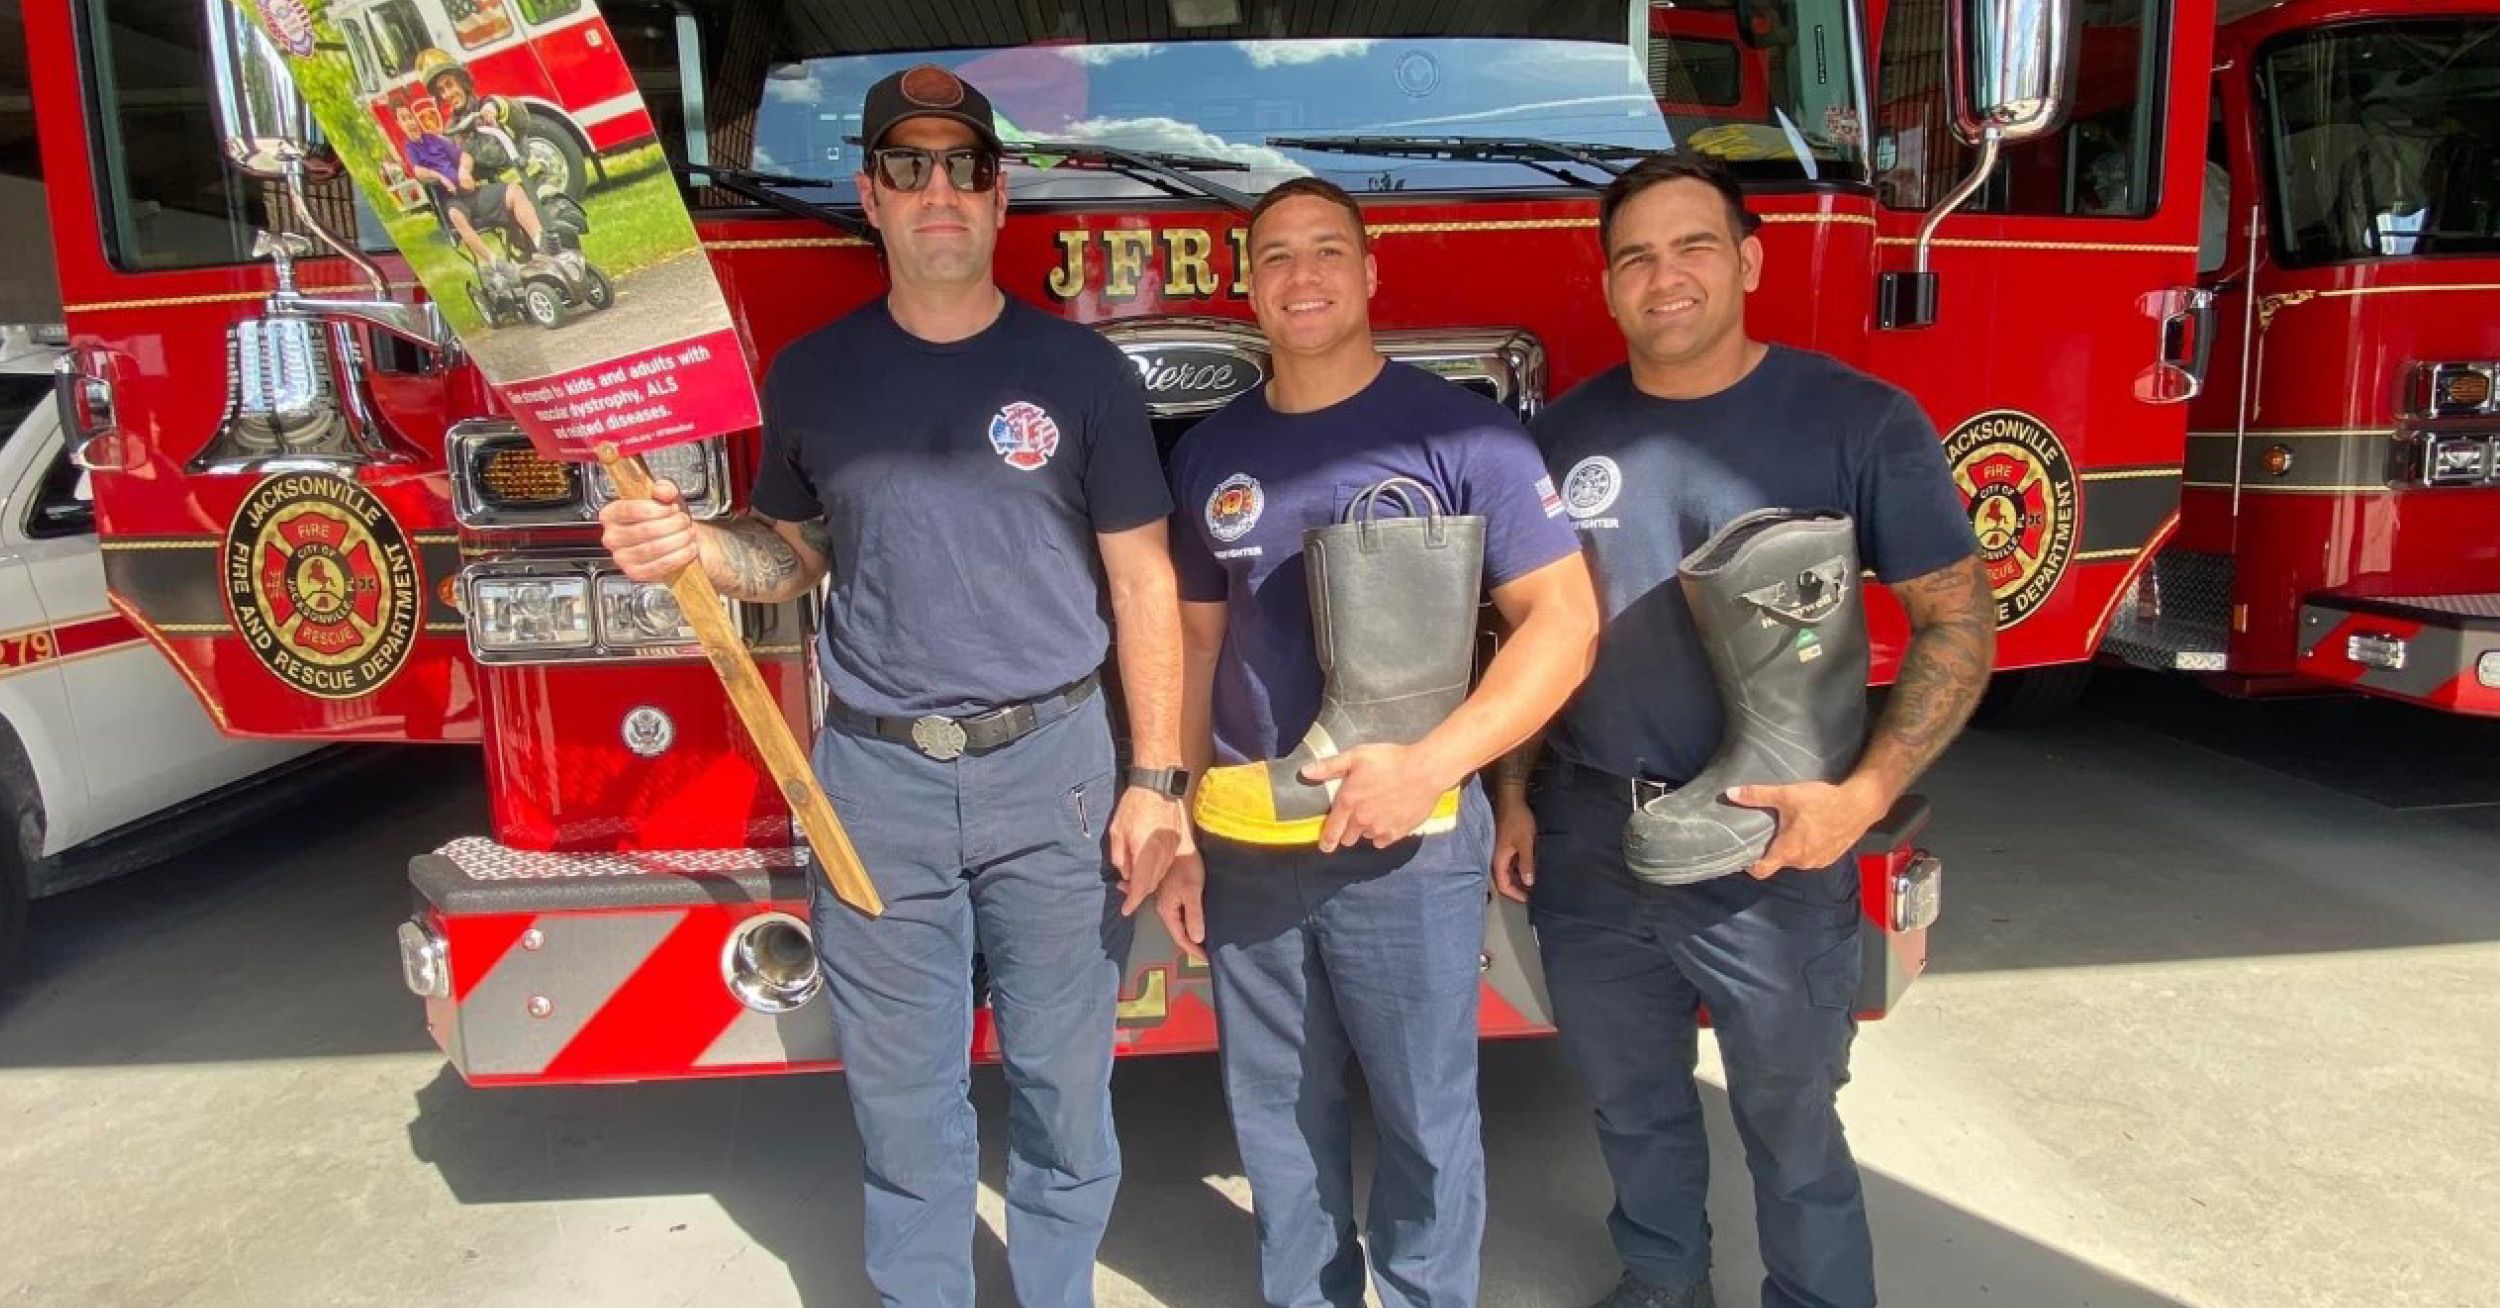 IAFF 'Fill the Boot' fundraisers launch nationwide to benefit MDA.